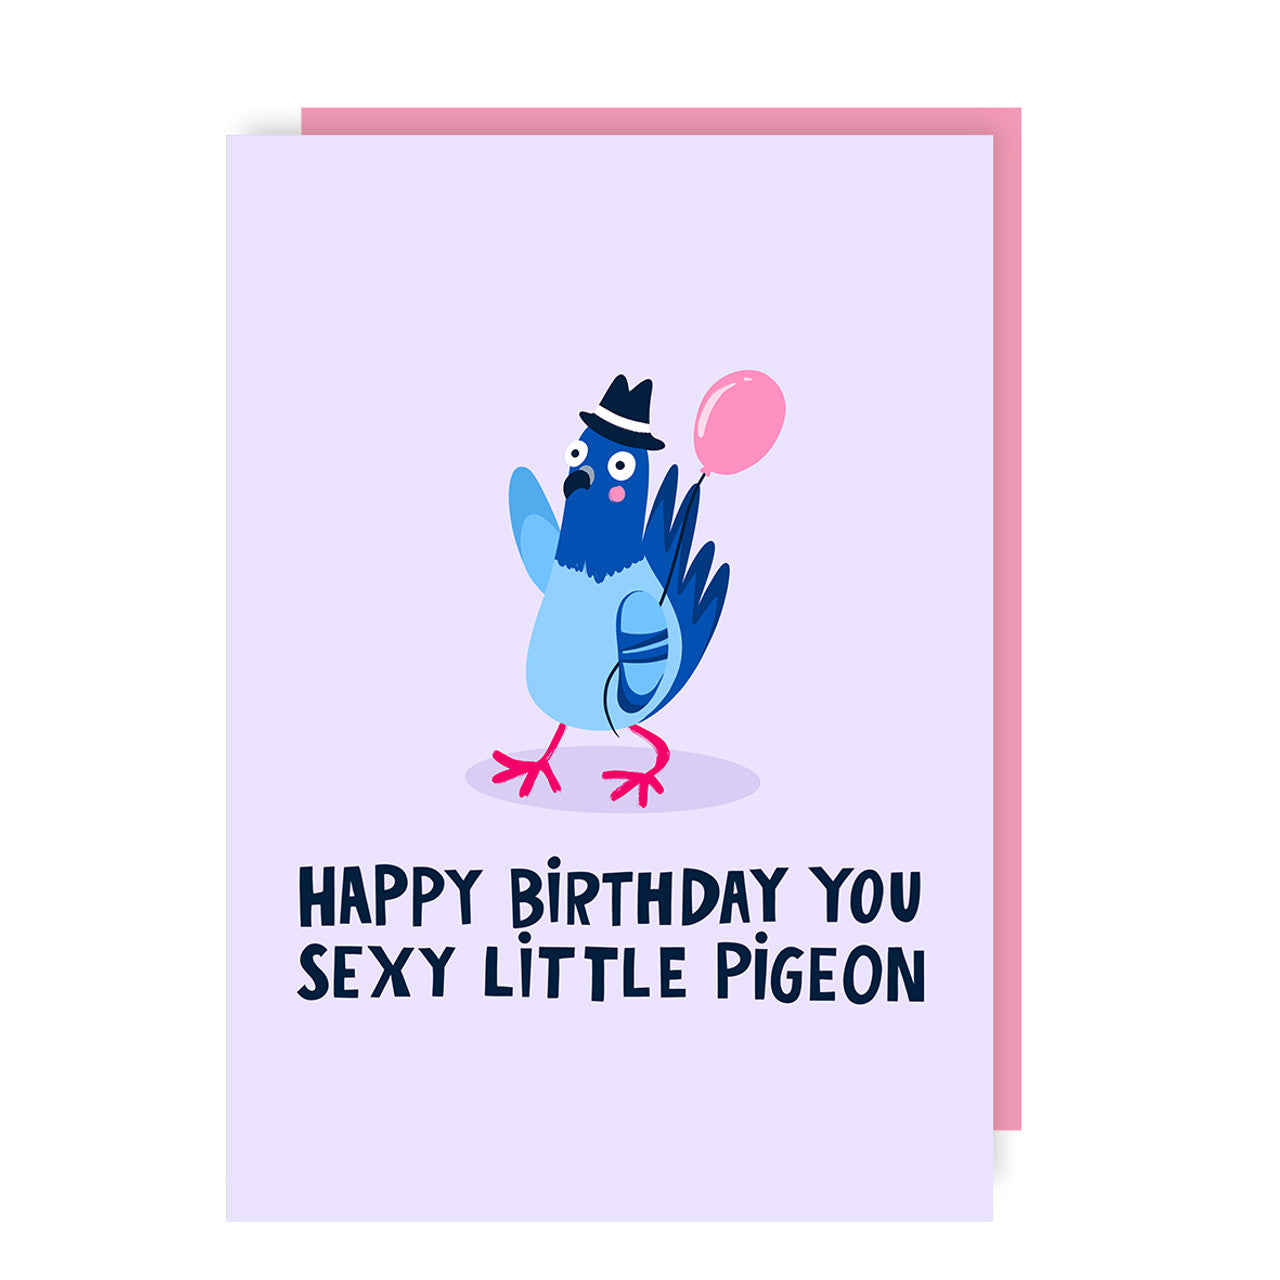 Birthday Card text reads "Happy Birthday you sexy little pigeon"